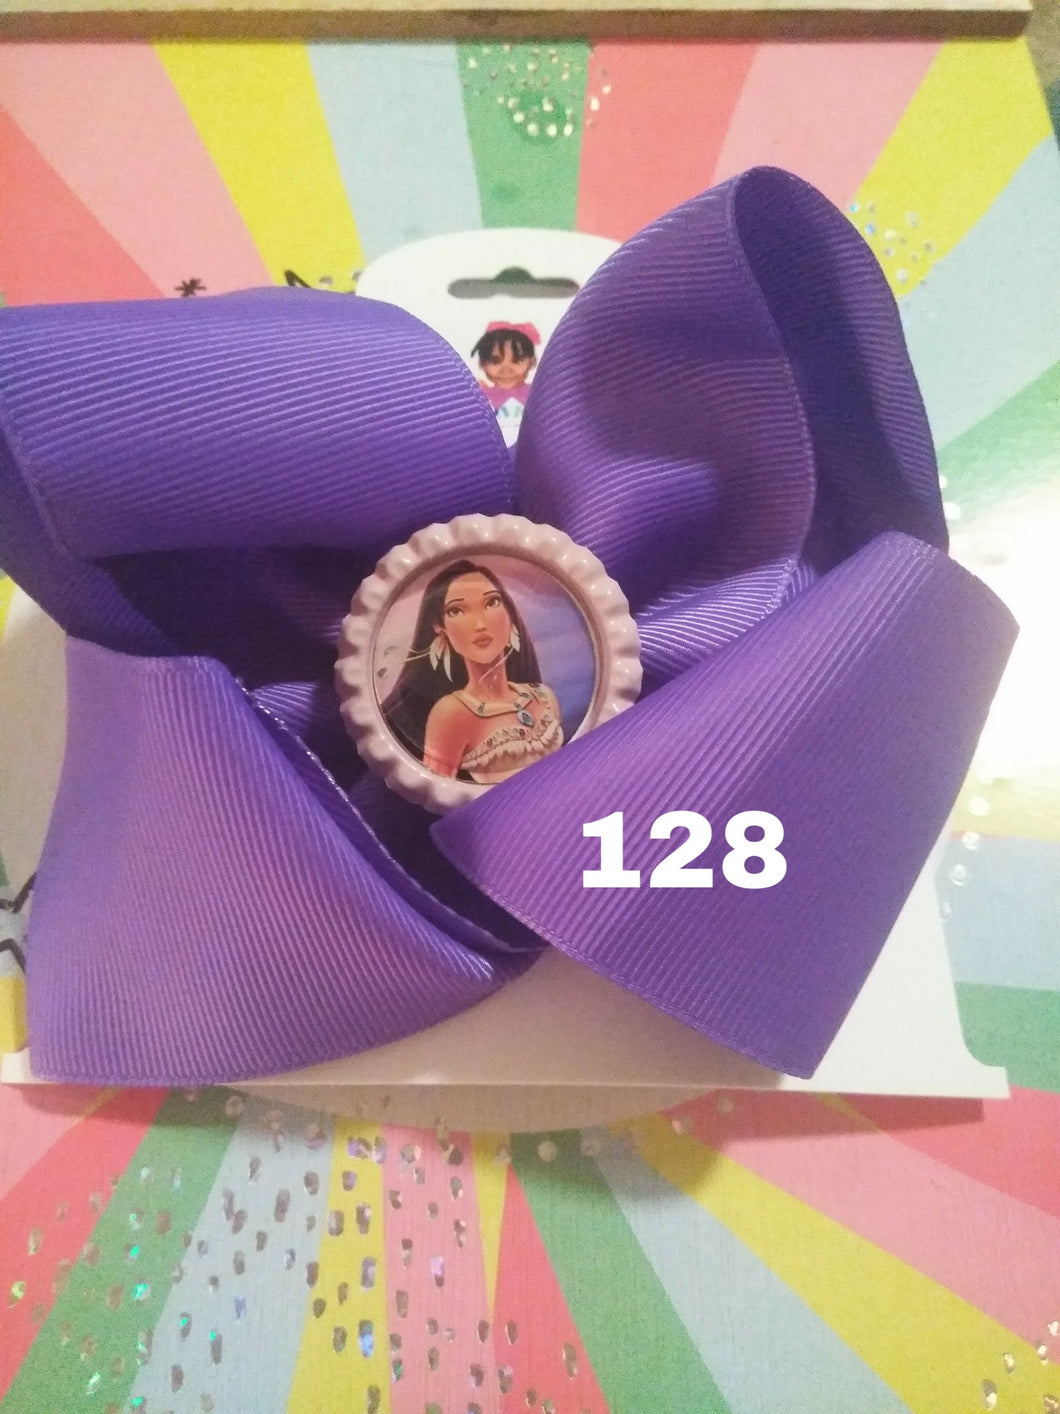 6 Inch Solid Colored Hair Bow with Pocahontas